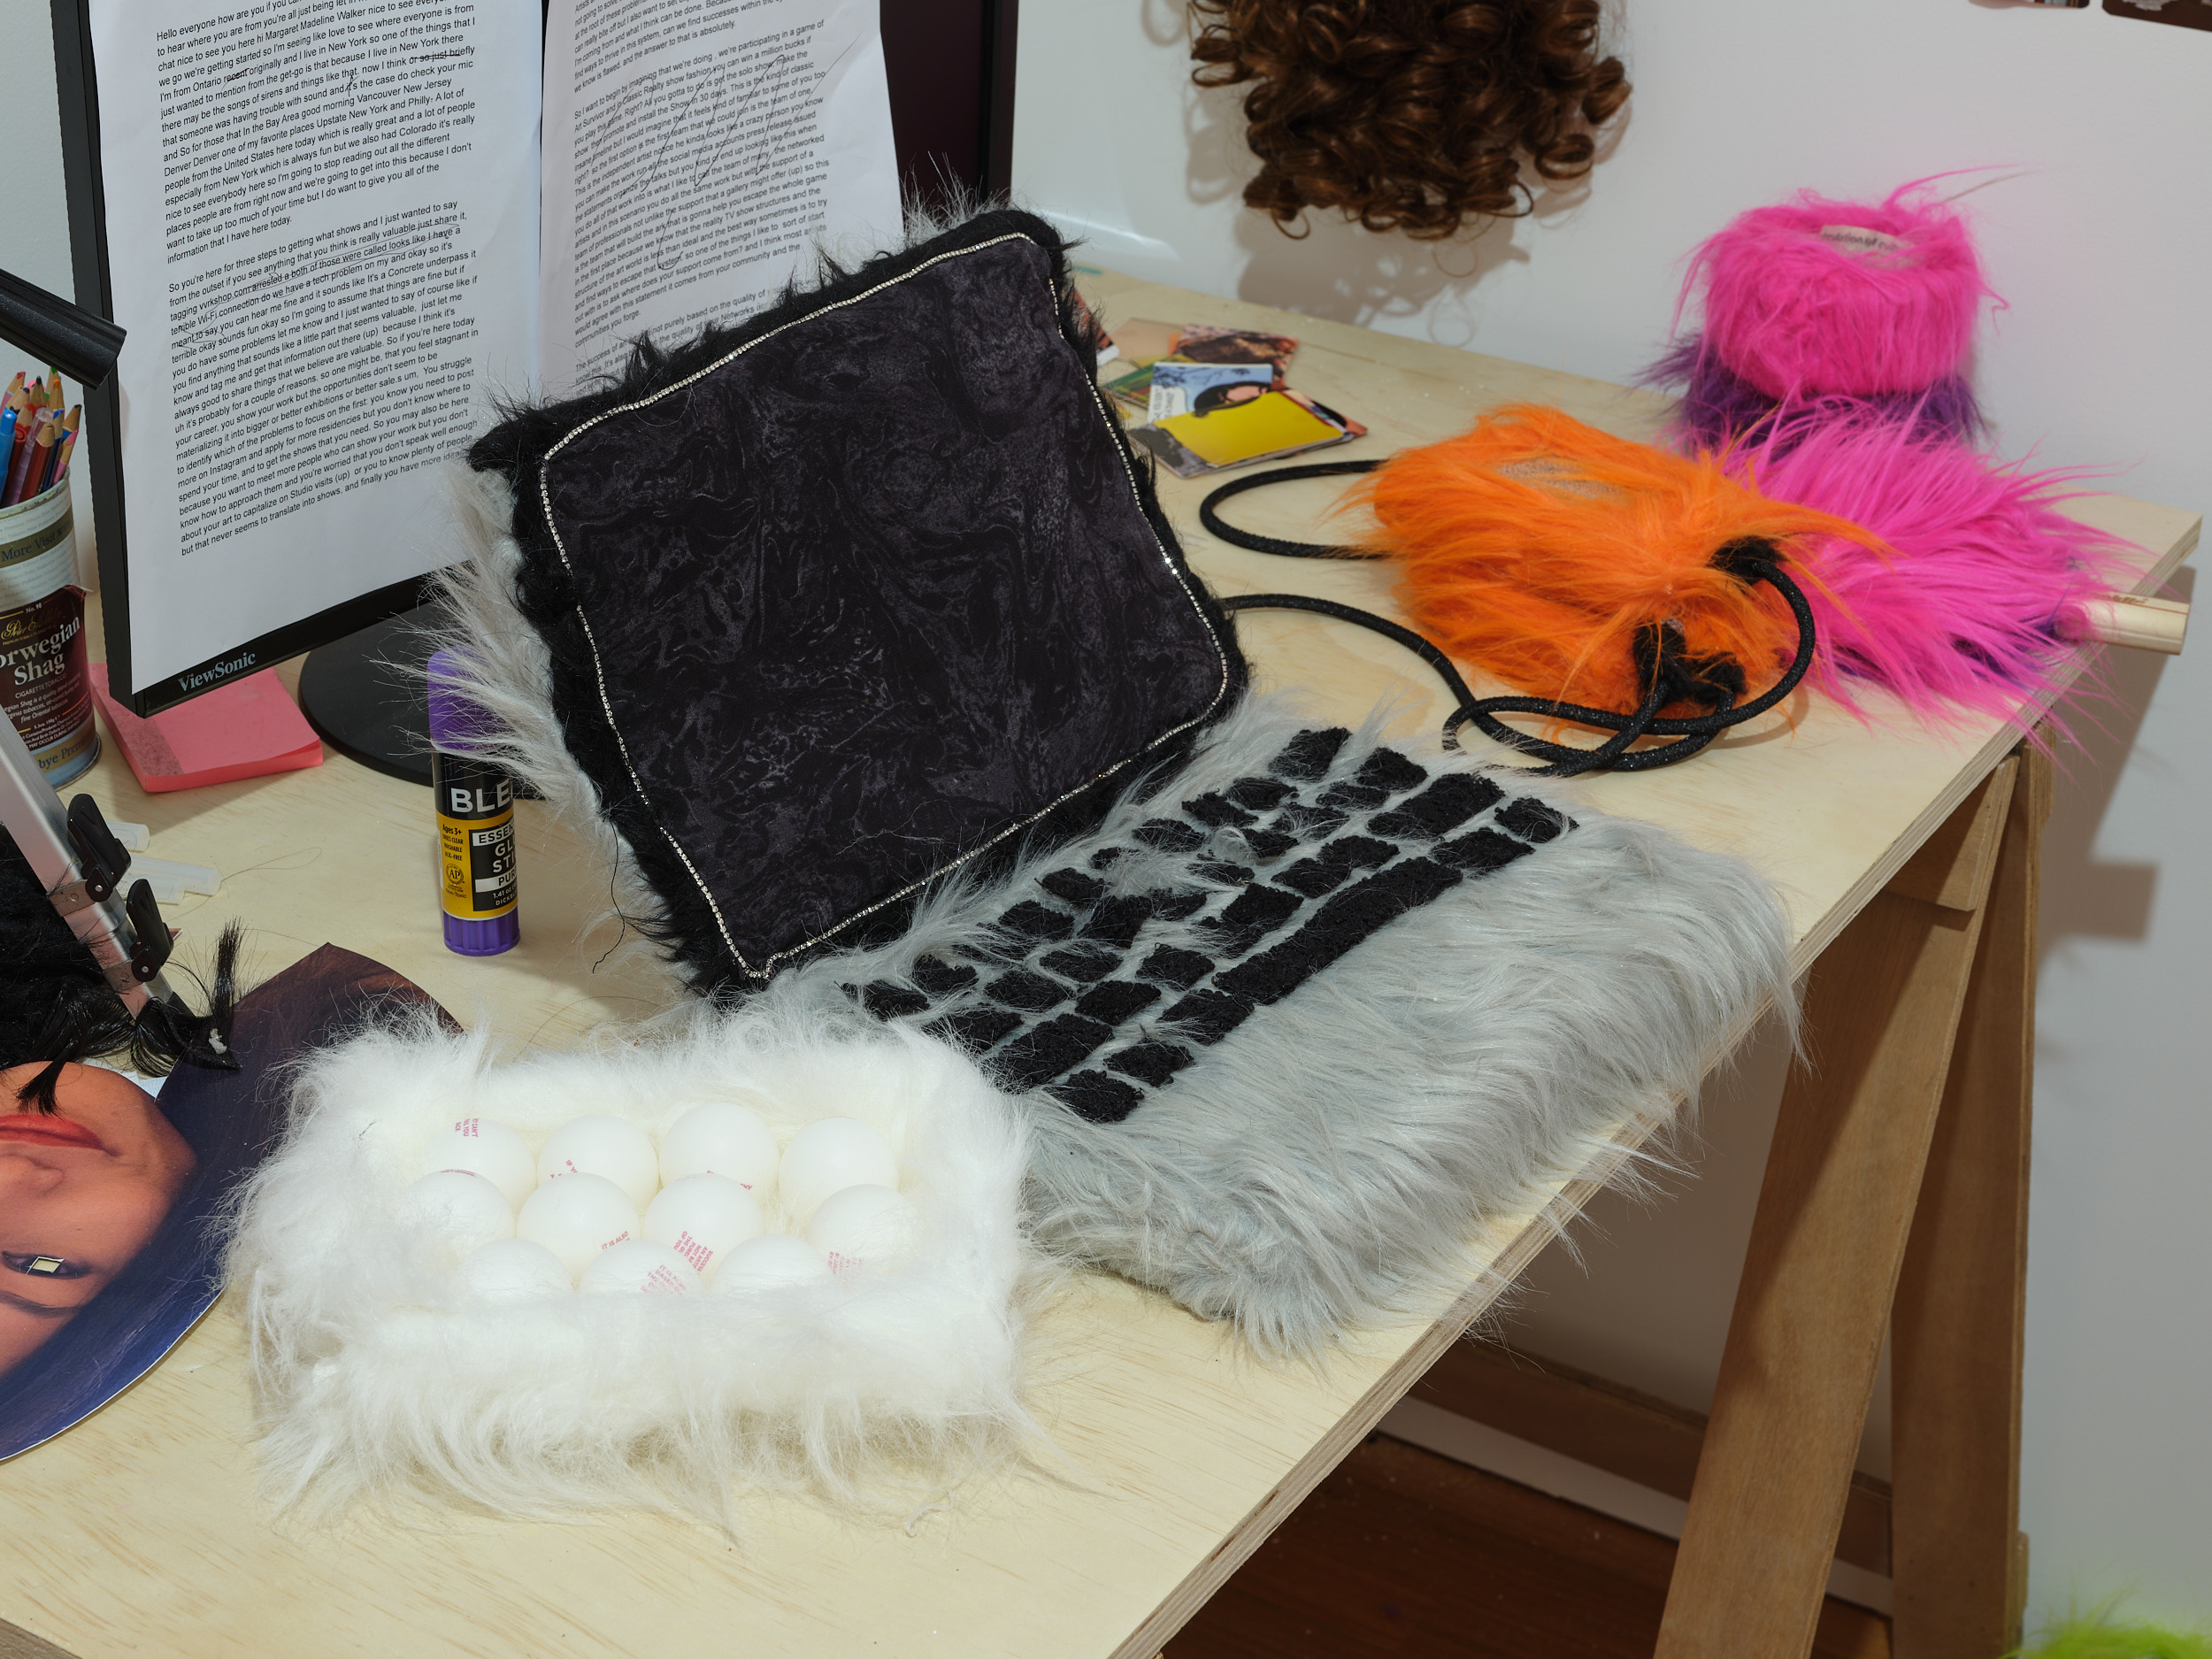 A messy desk with a laptop, hard drives, and duct tape made of faux fur